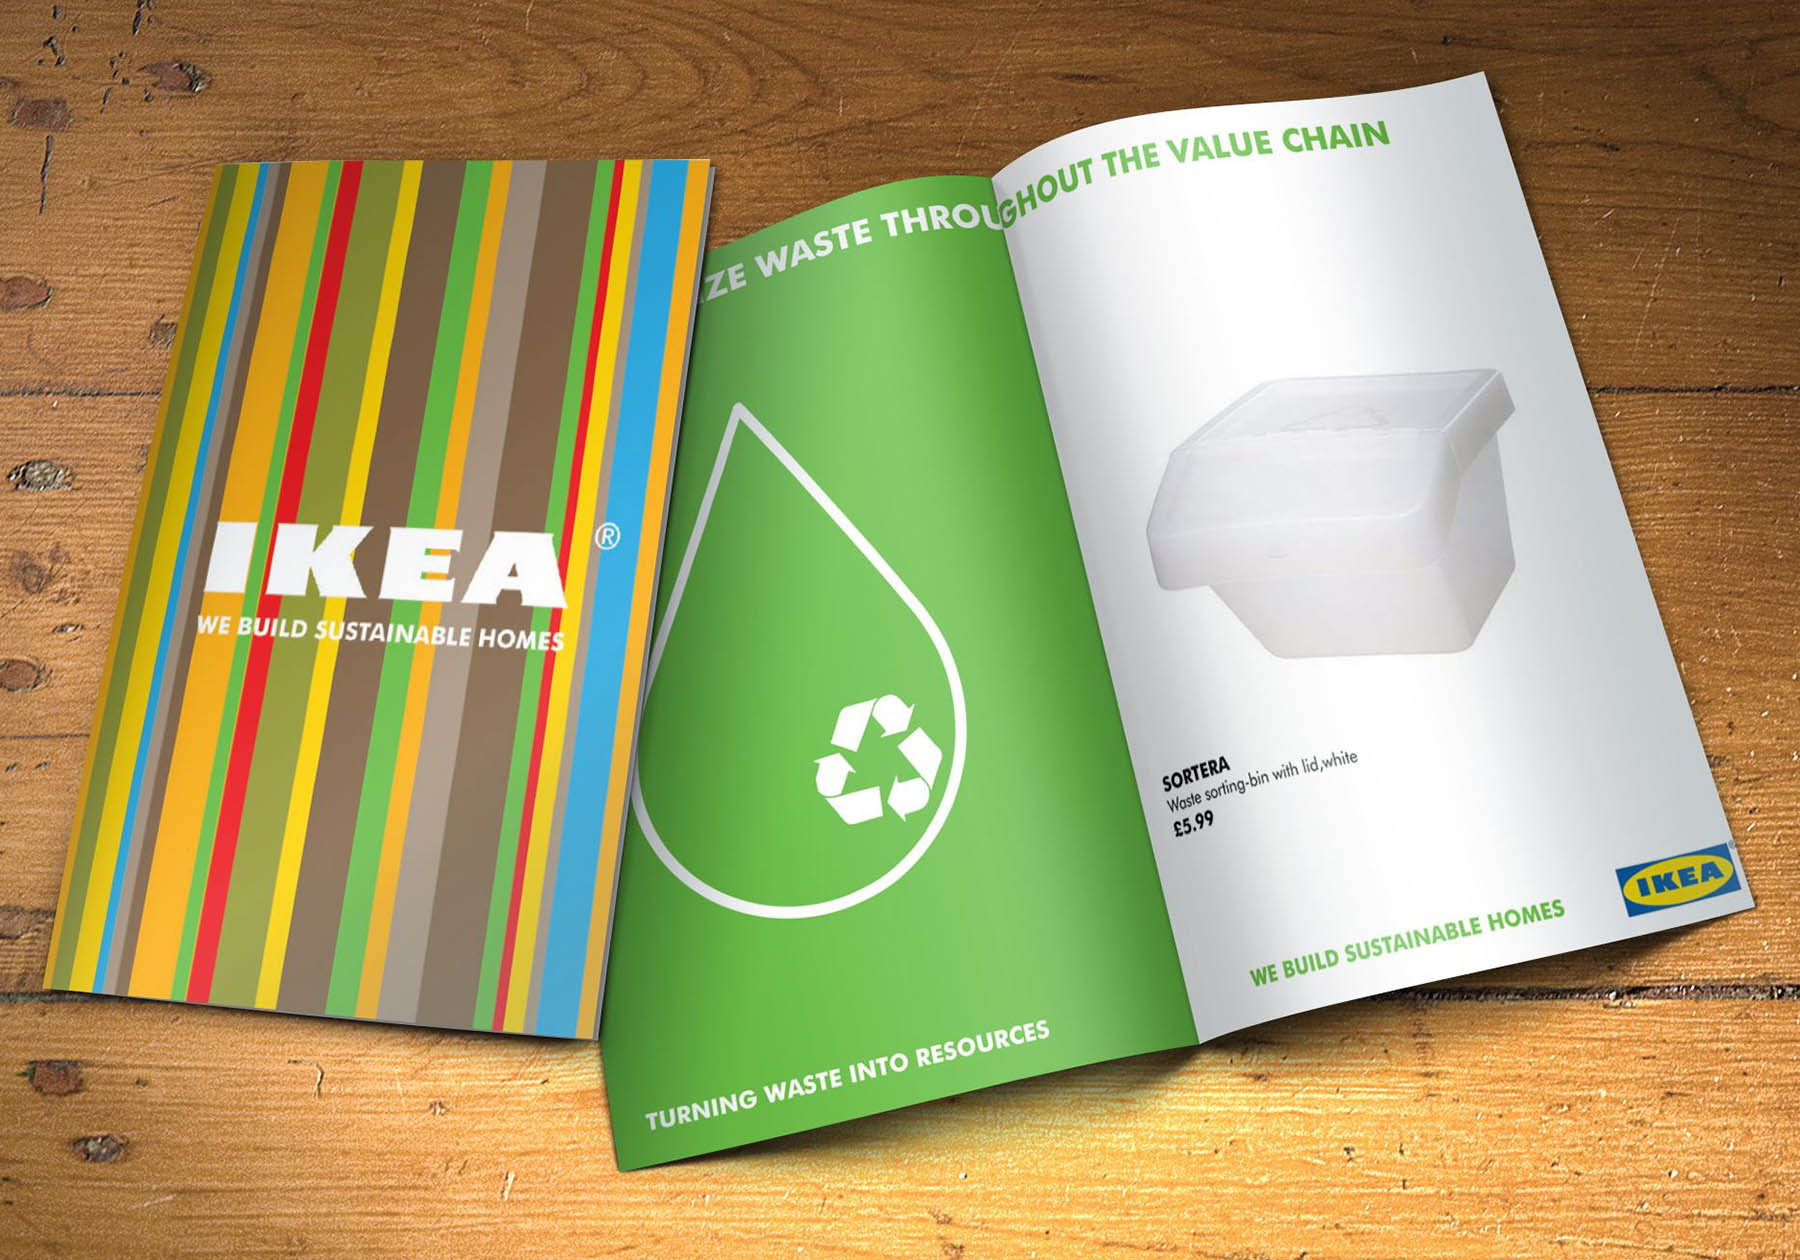 Double page spread for Ikea’s position on turning waste into resources